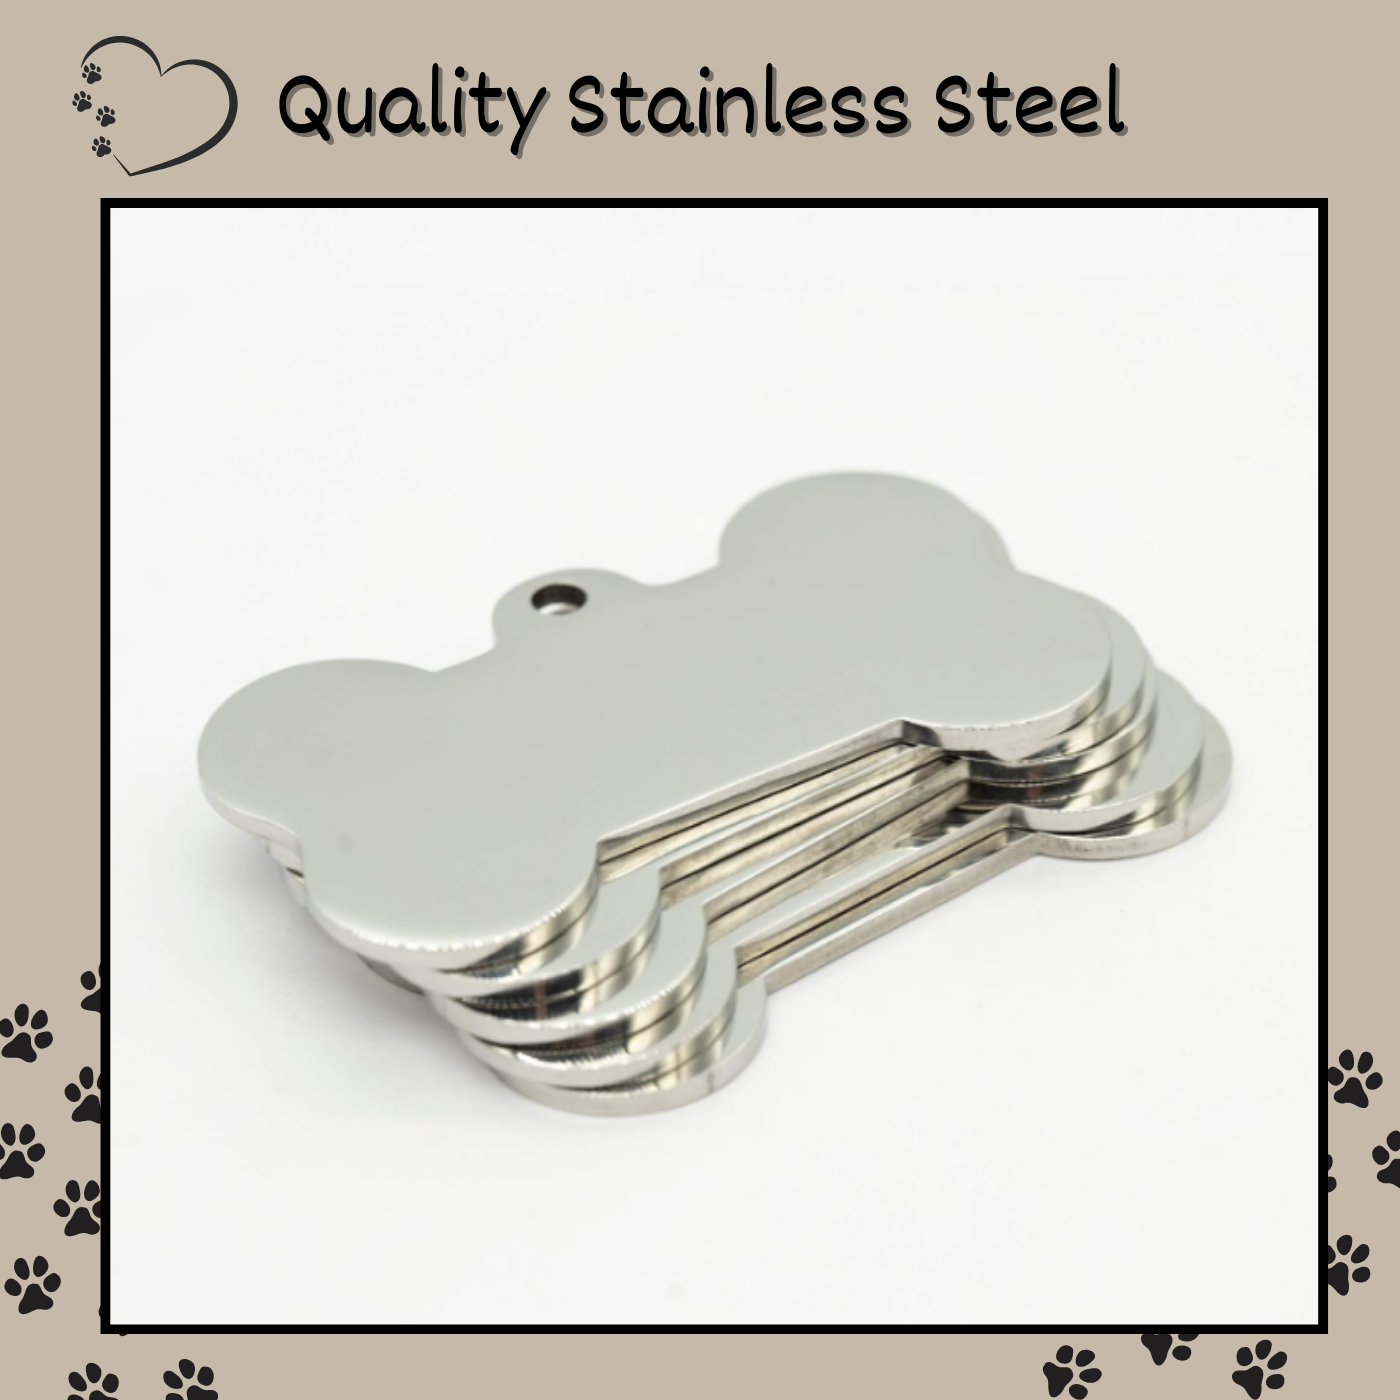 High-quality laser engraved name tag for your pet. Crisp, clear, and stylishly designed for maximum readability.